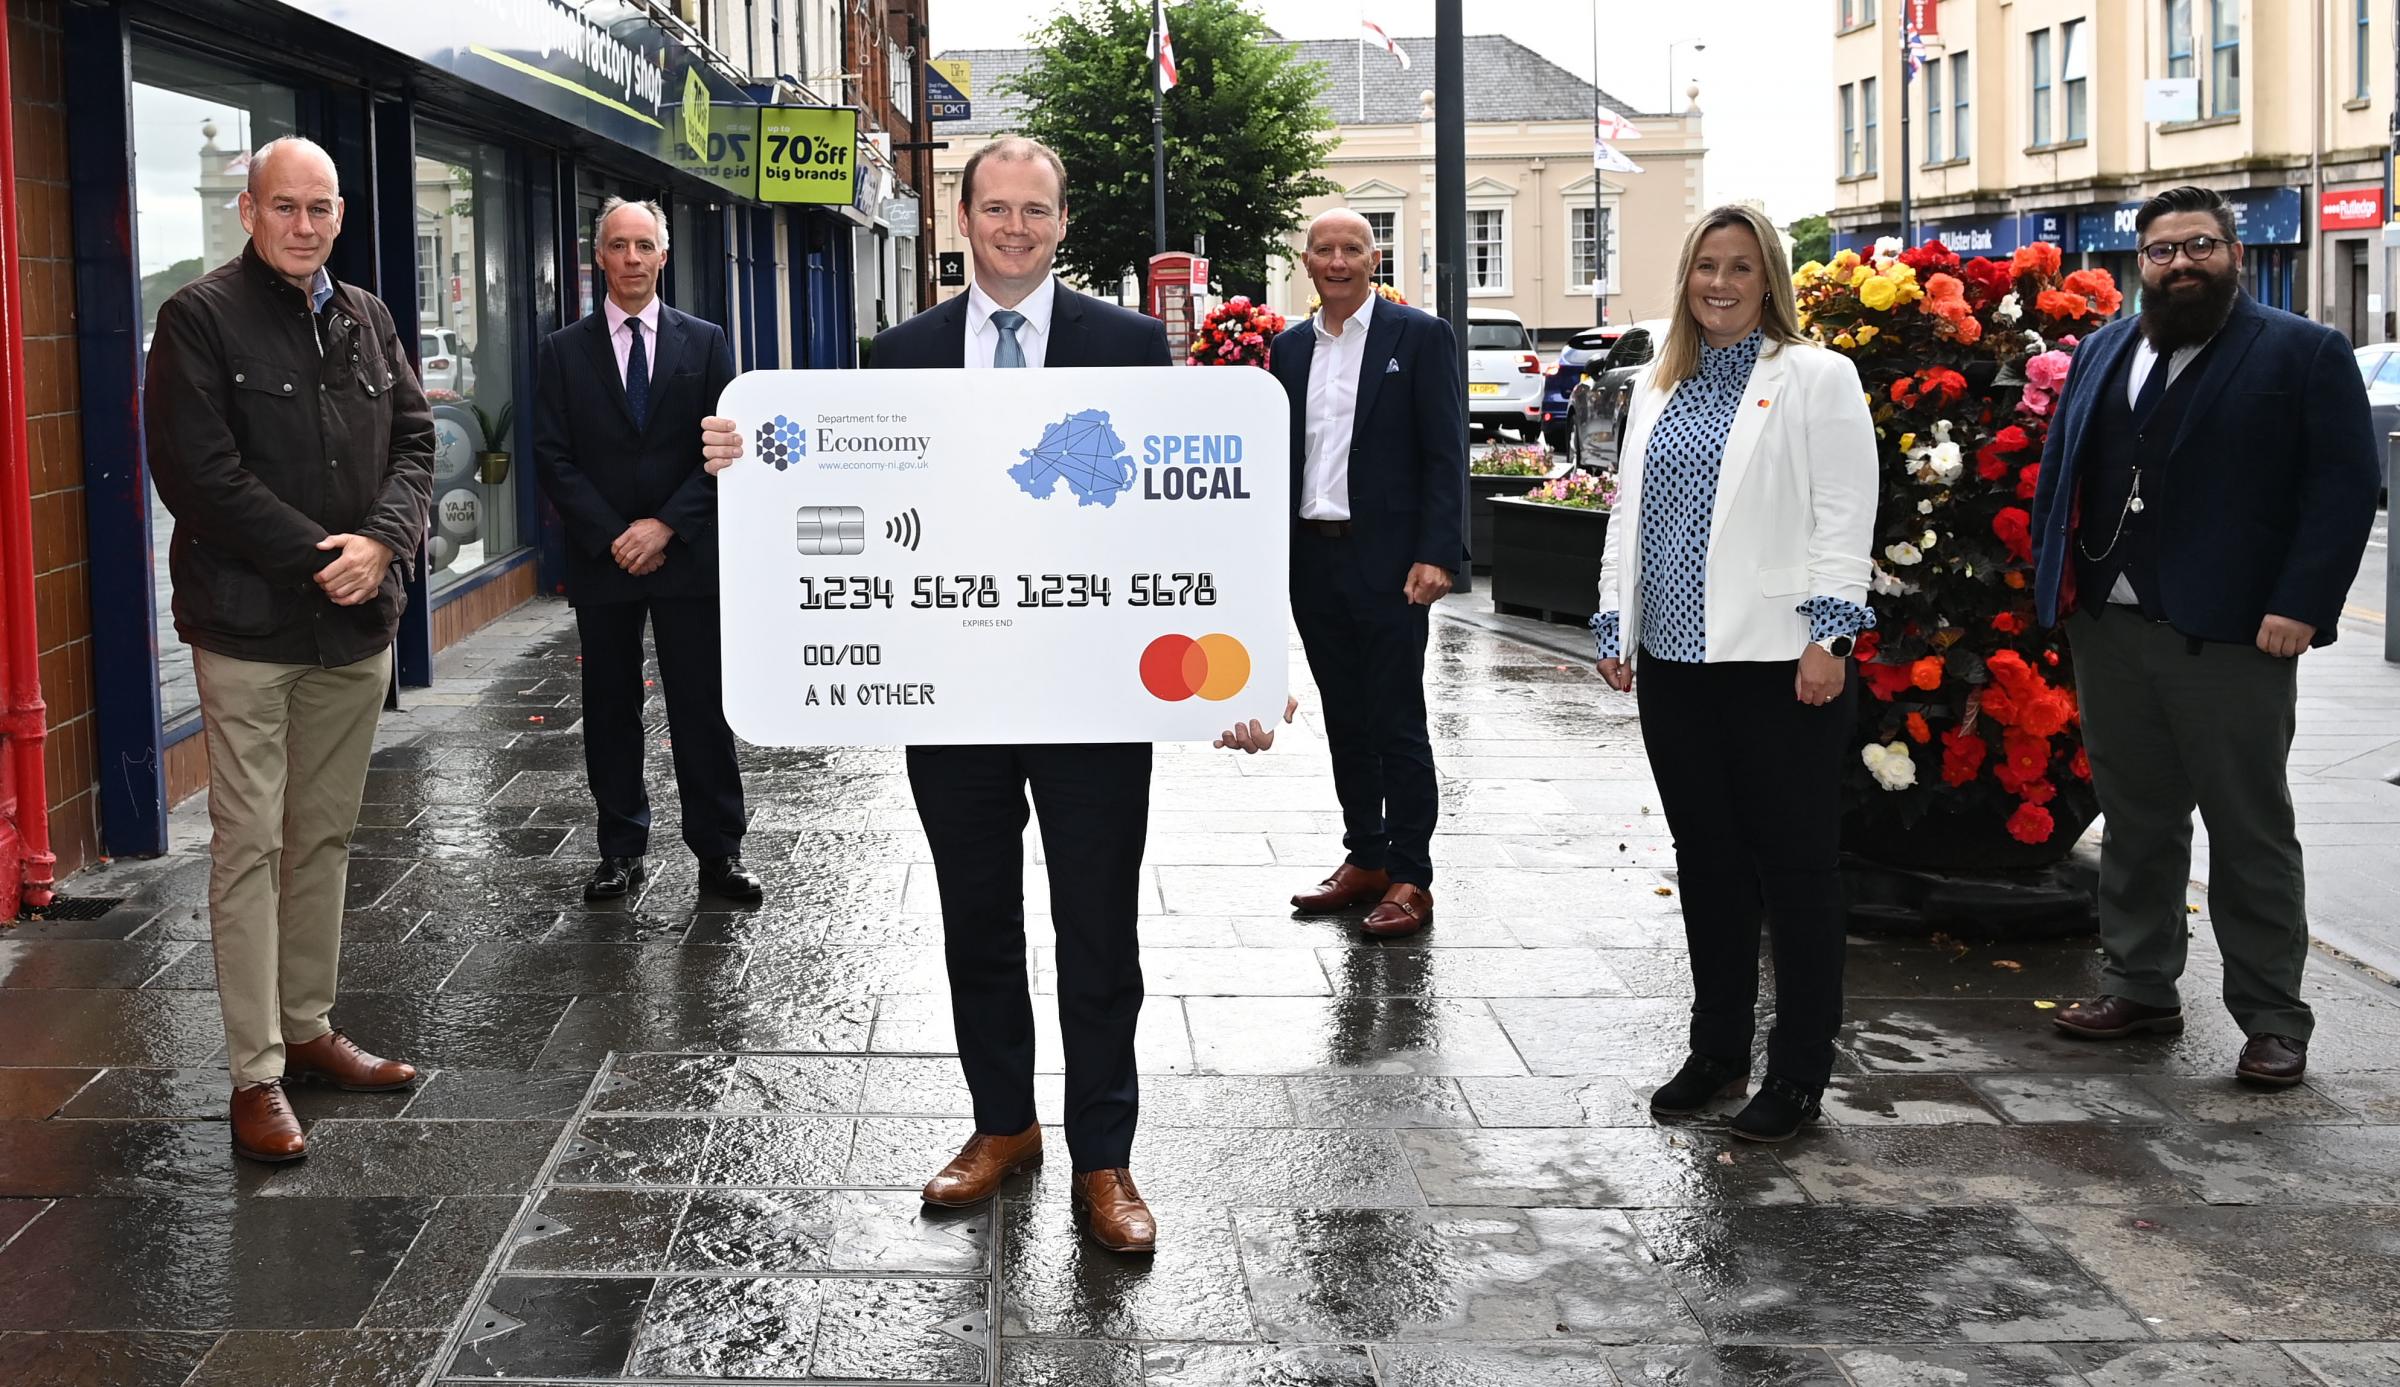 Economy Minister awards contract for delivery of high street scheme